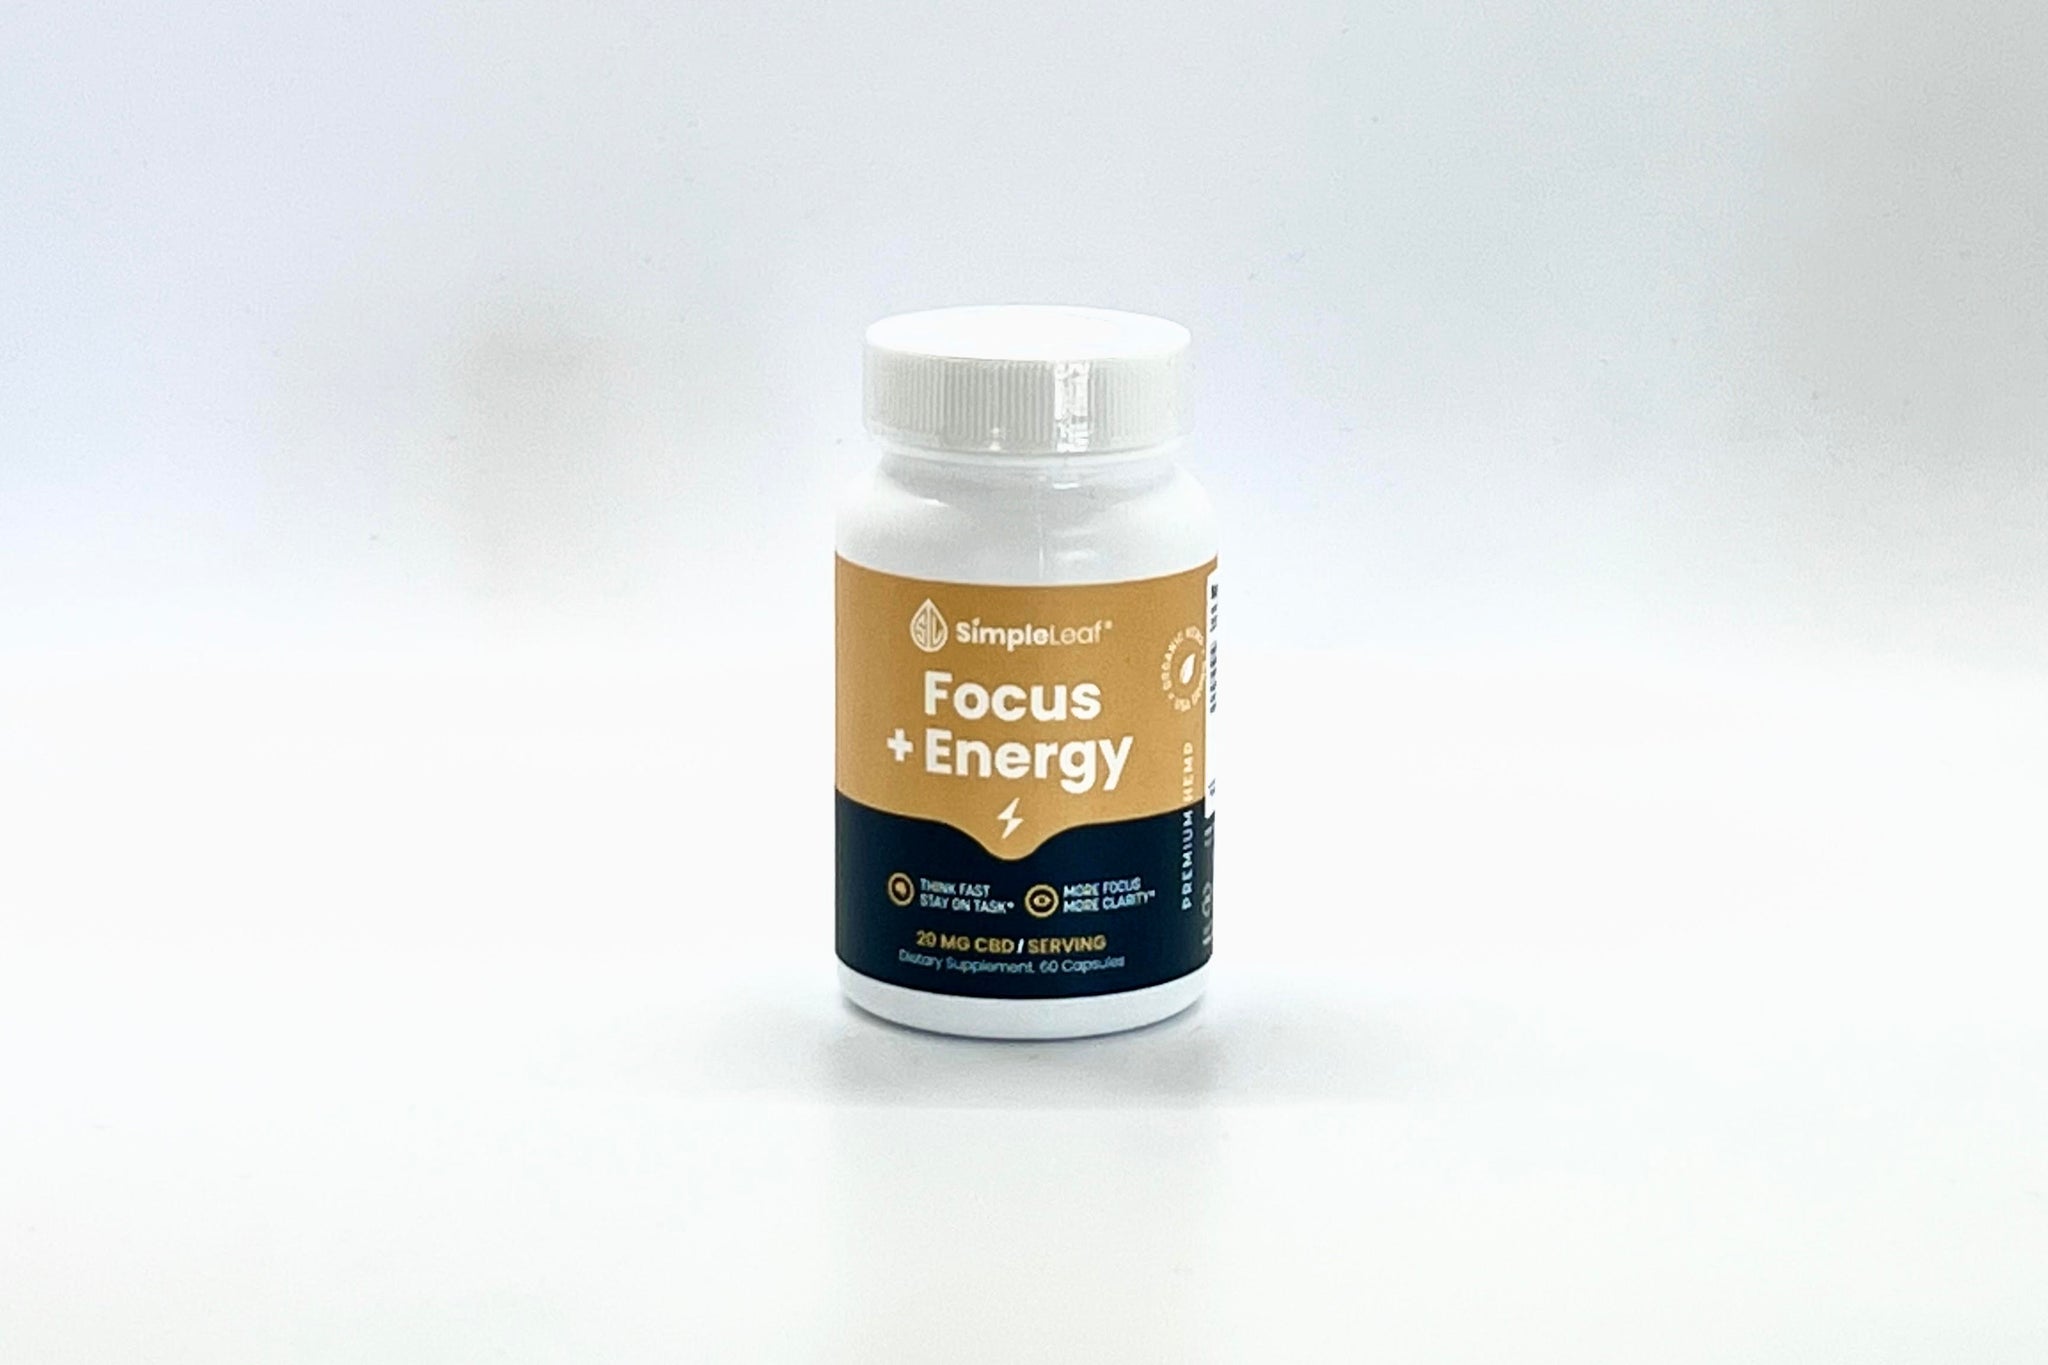 Simple Leaf Focus + Energy Capsules (1200mg, 60-day Supply)